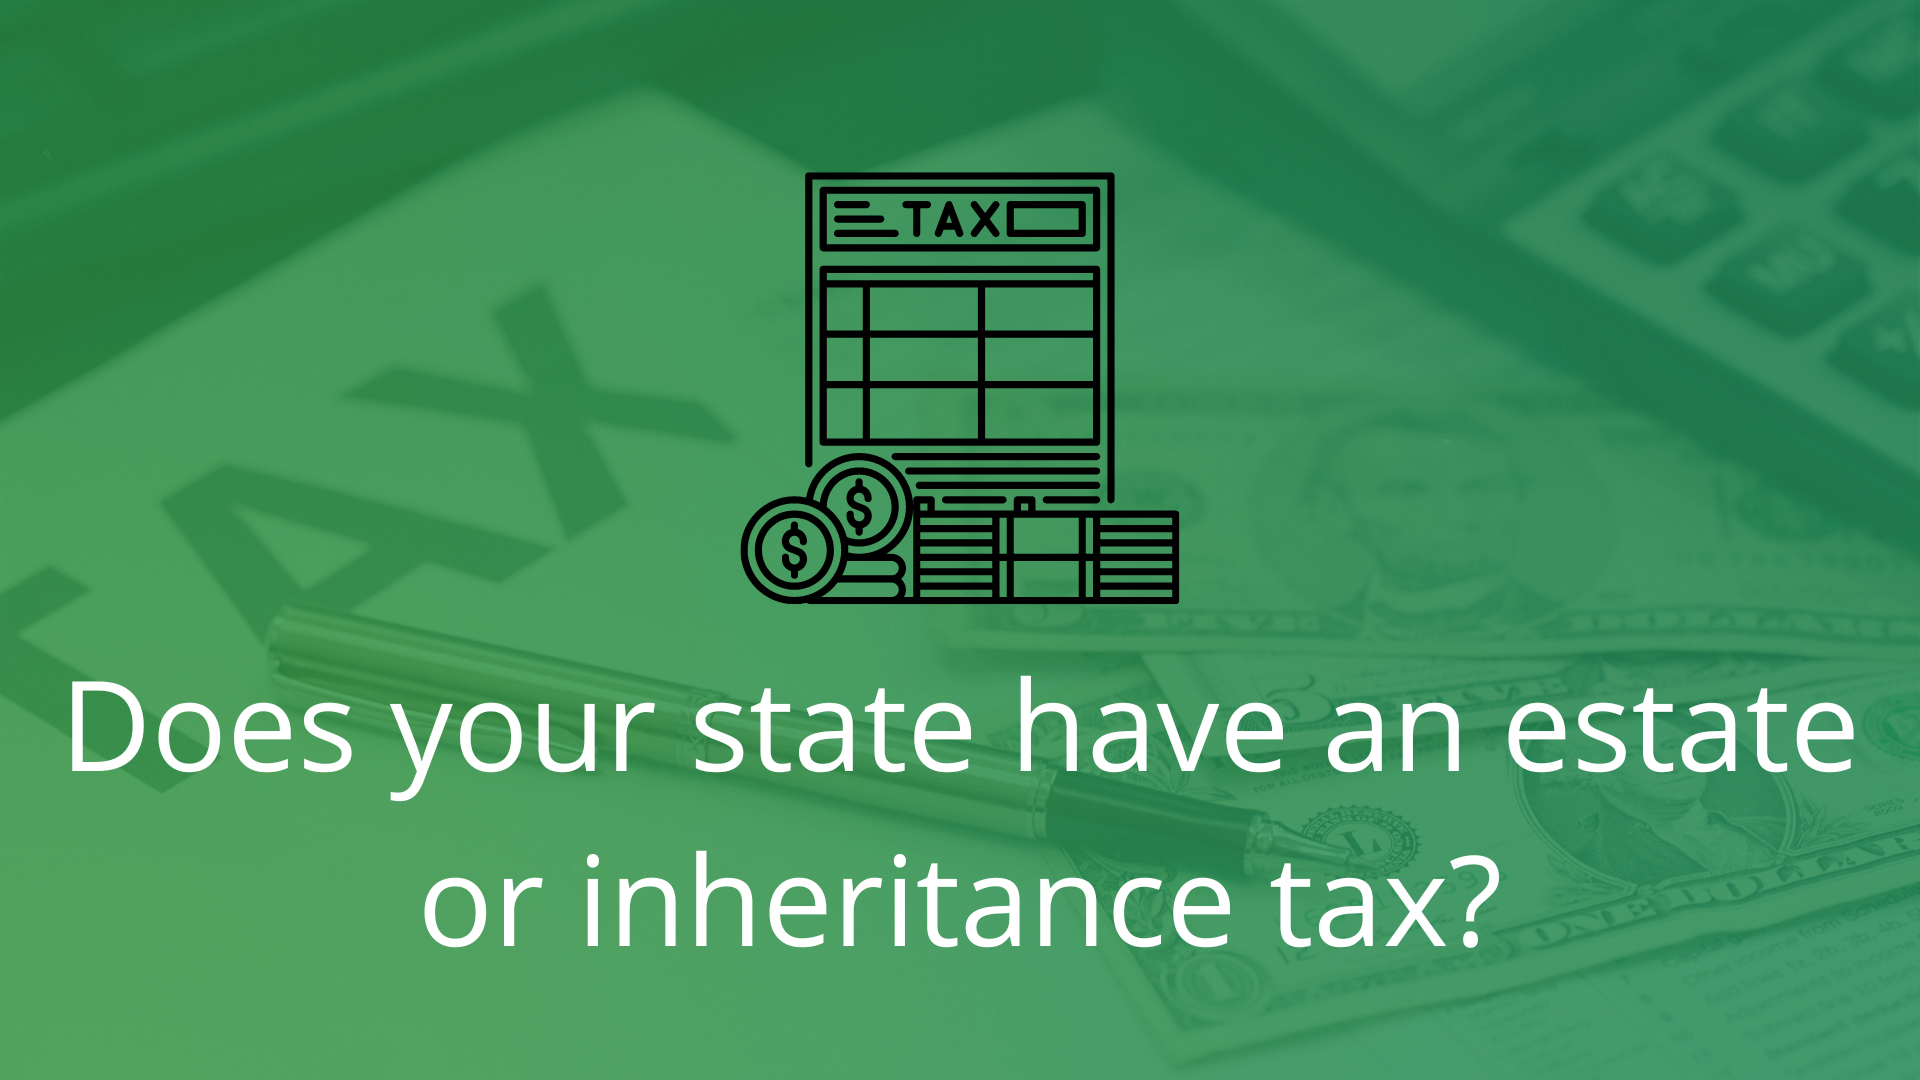 Does your state have an estate or inheritance tax?